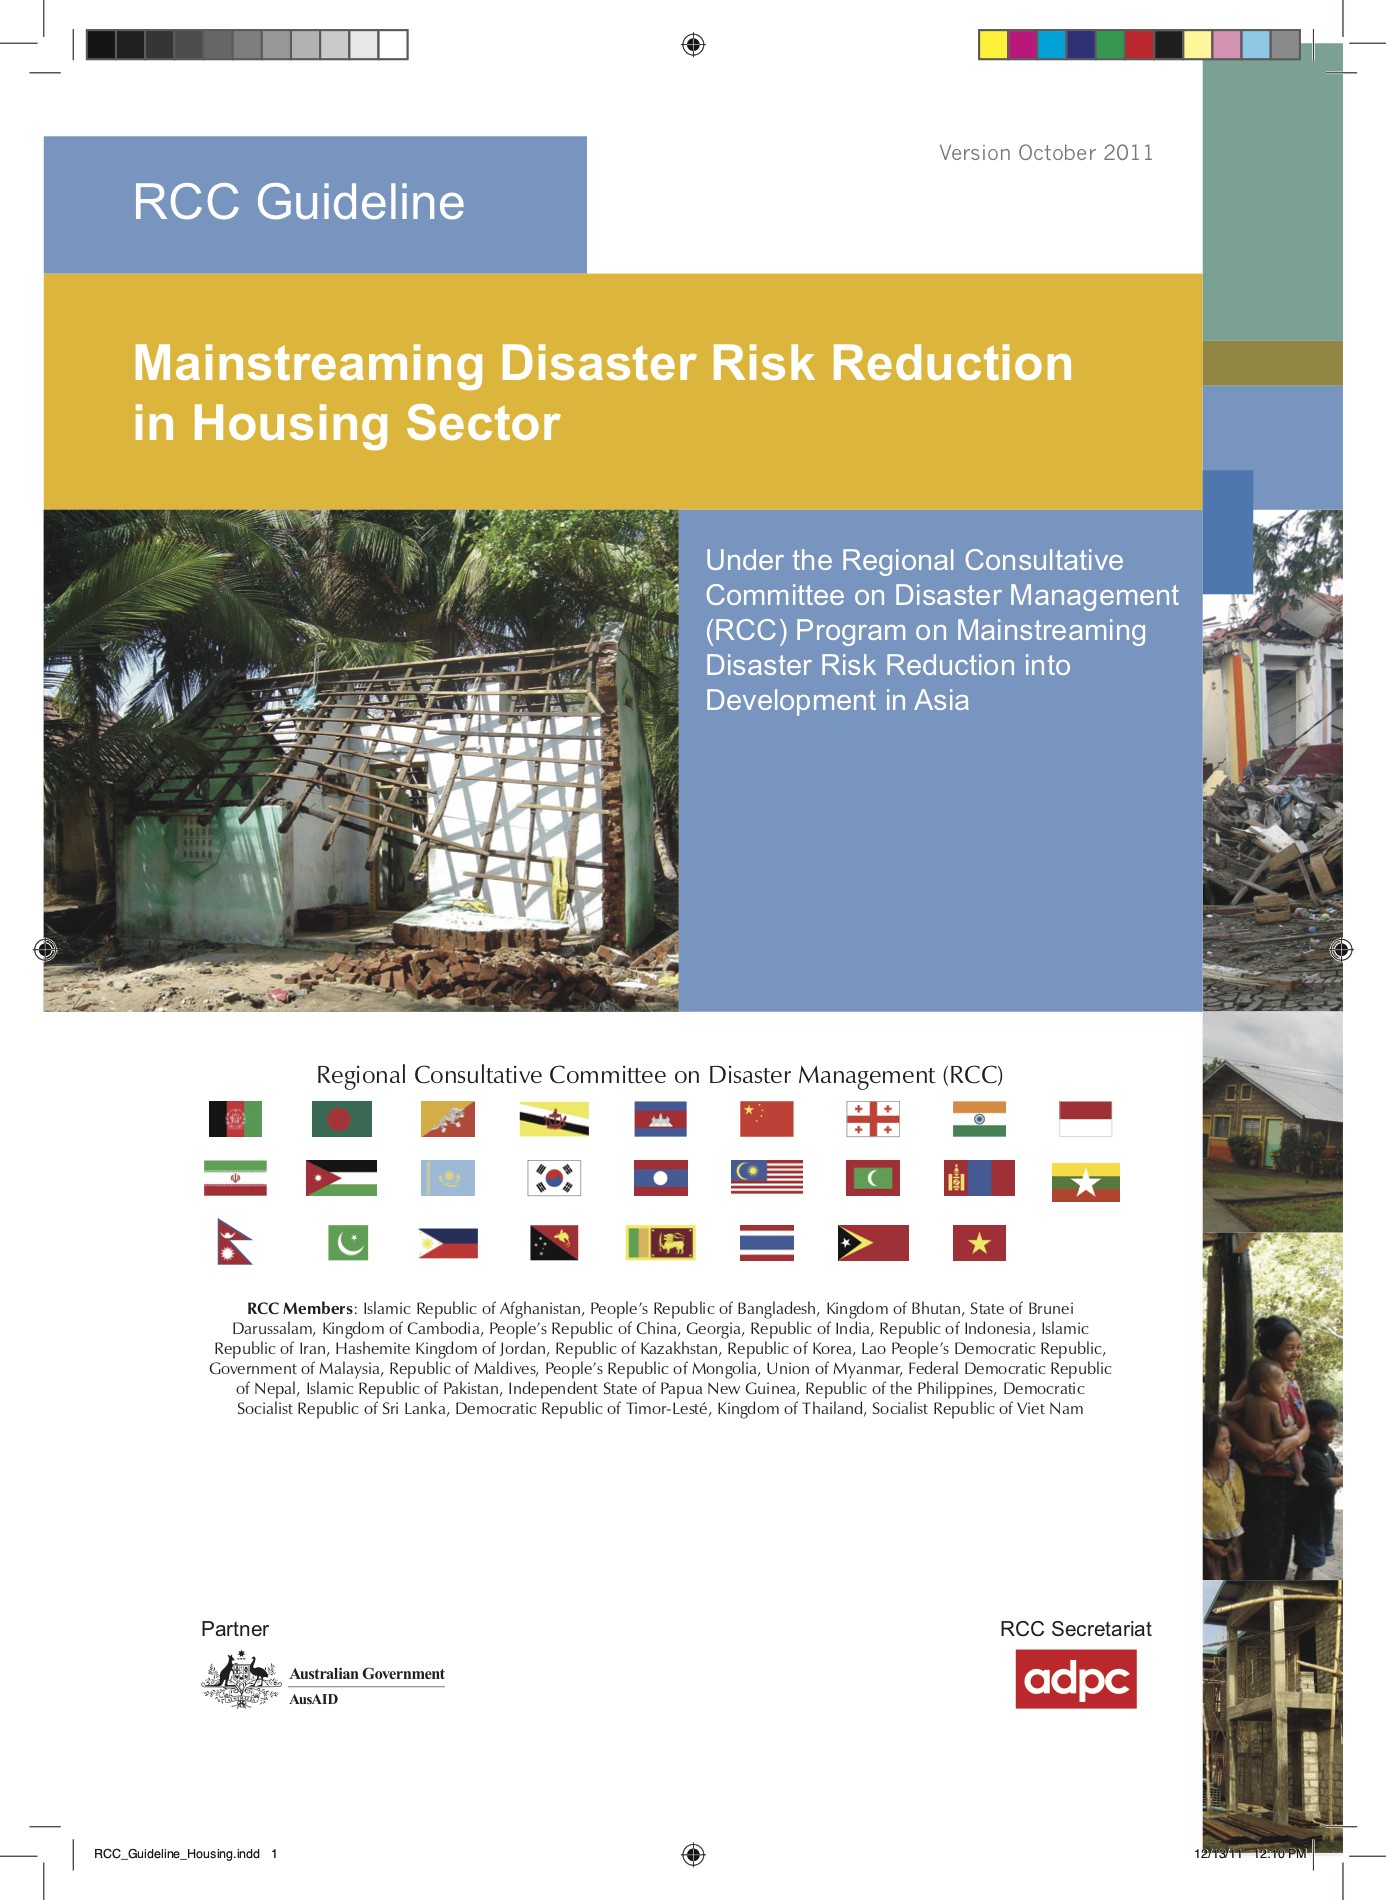 RCC Guideline: Mainstreaming Disaster Risk Reduction in Housing Sector